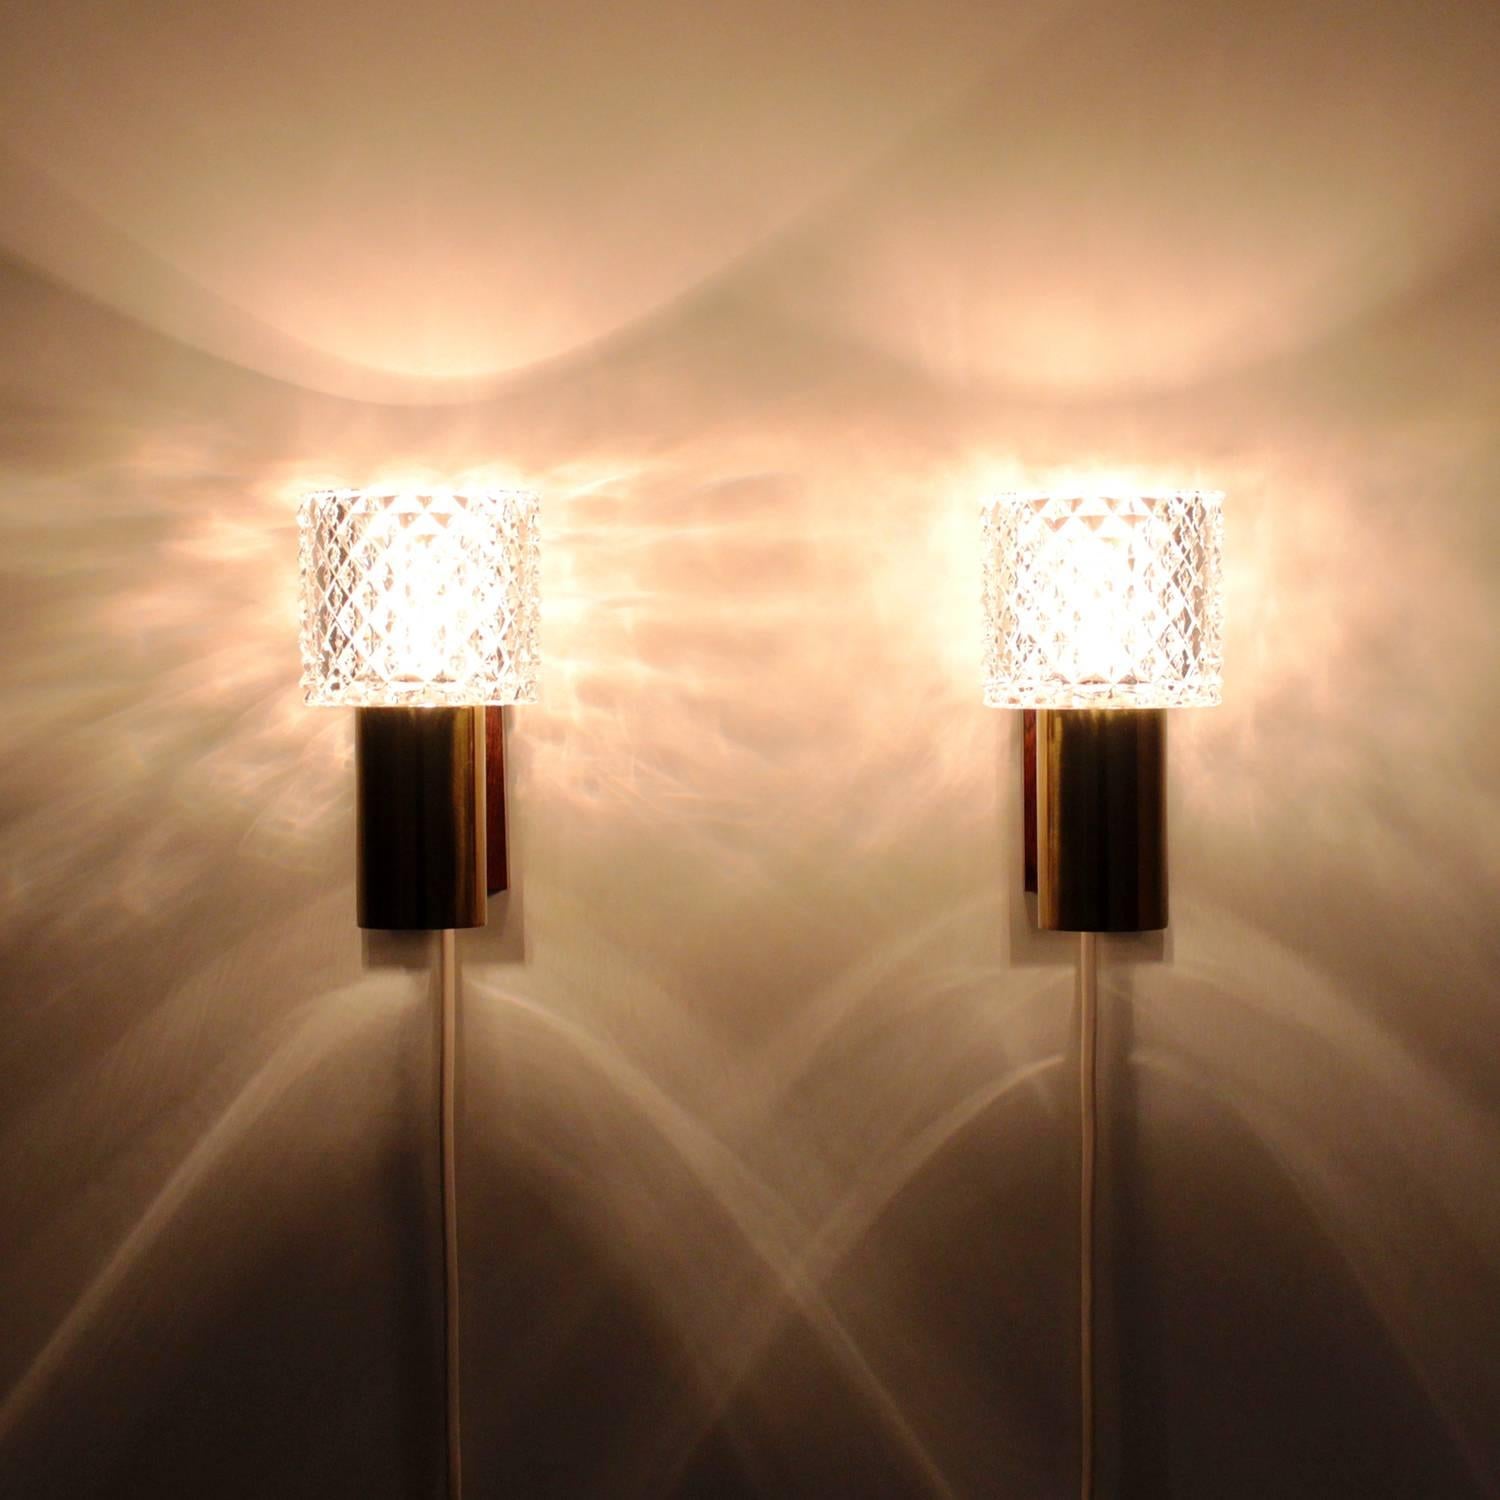 Scandinavian Crystal Glass and Rosewood Pair of Wall Sconces, 1960s Danish Lighting Design